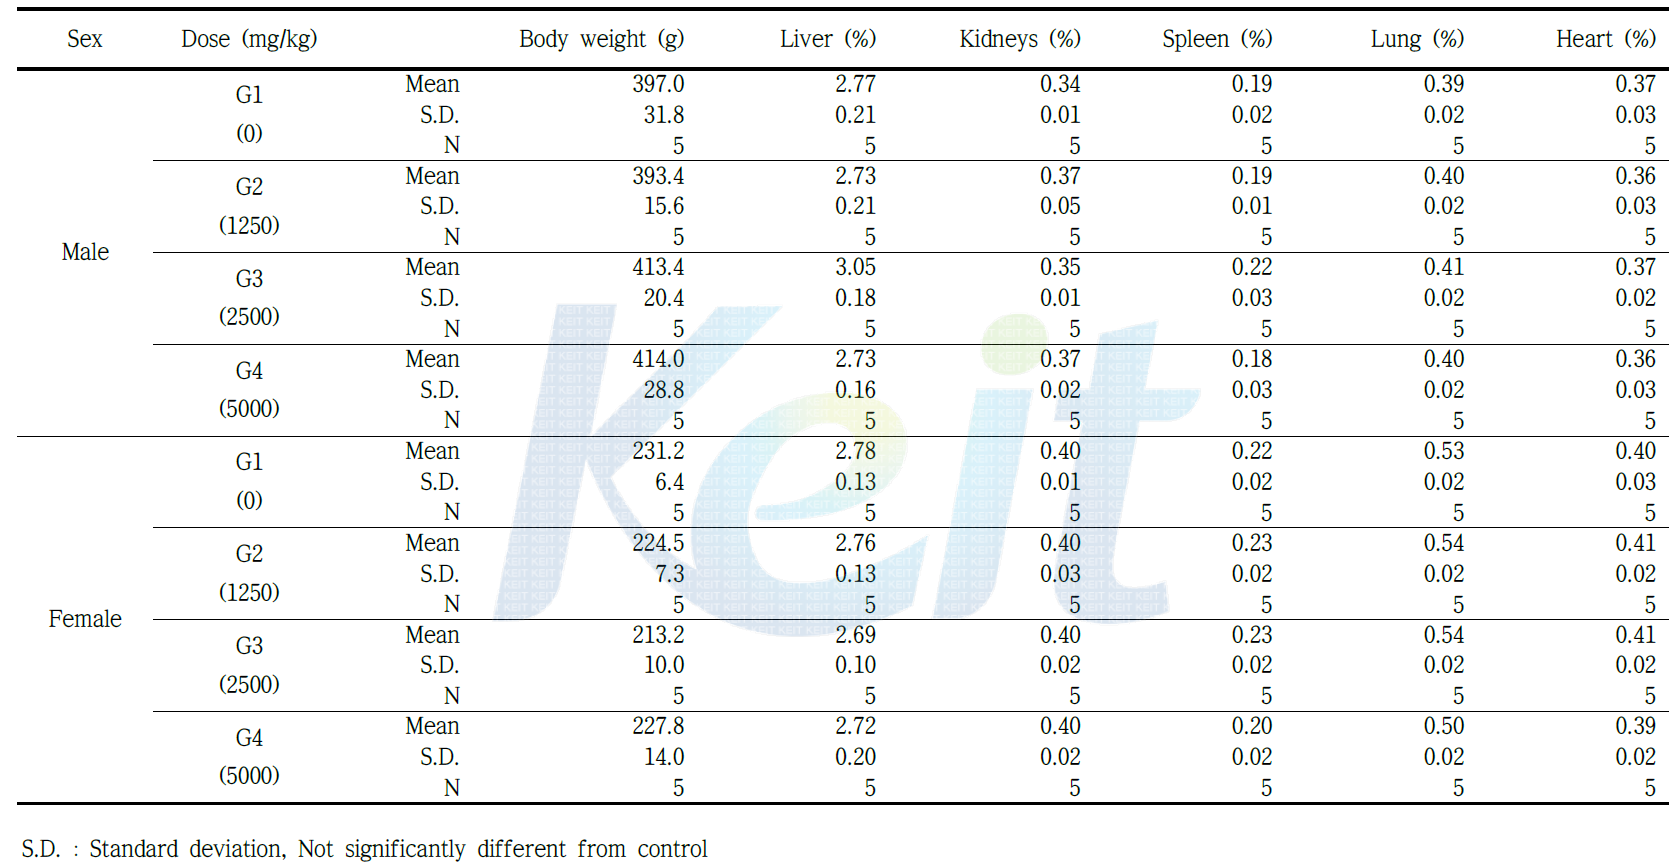 Group mean relative (% of body weight) organ weight